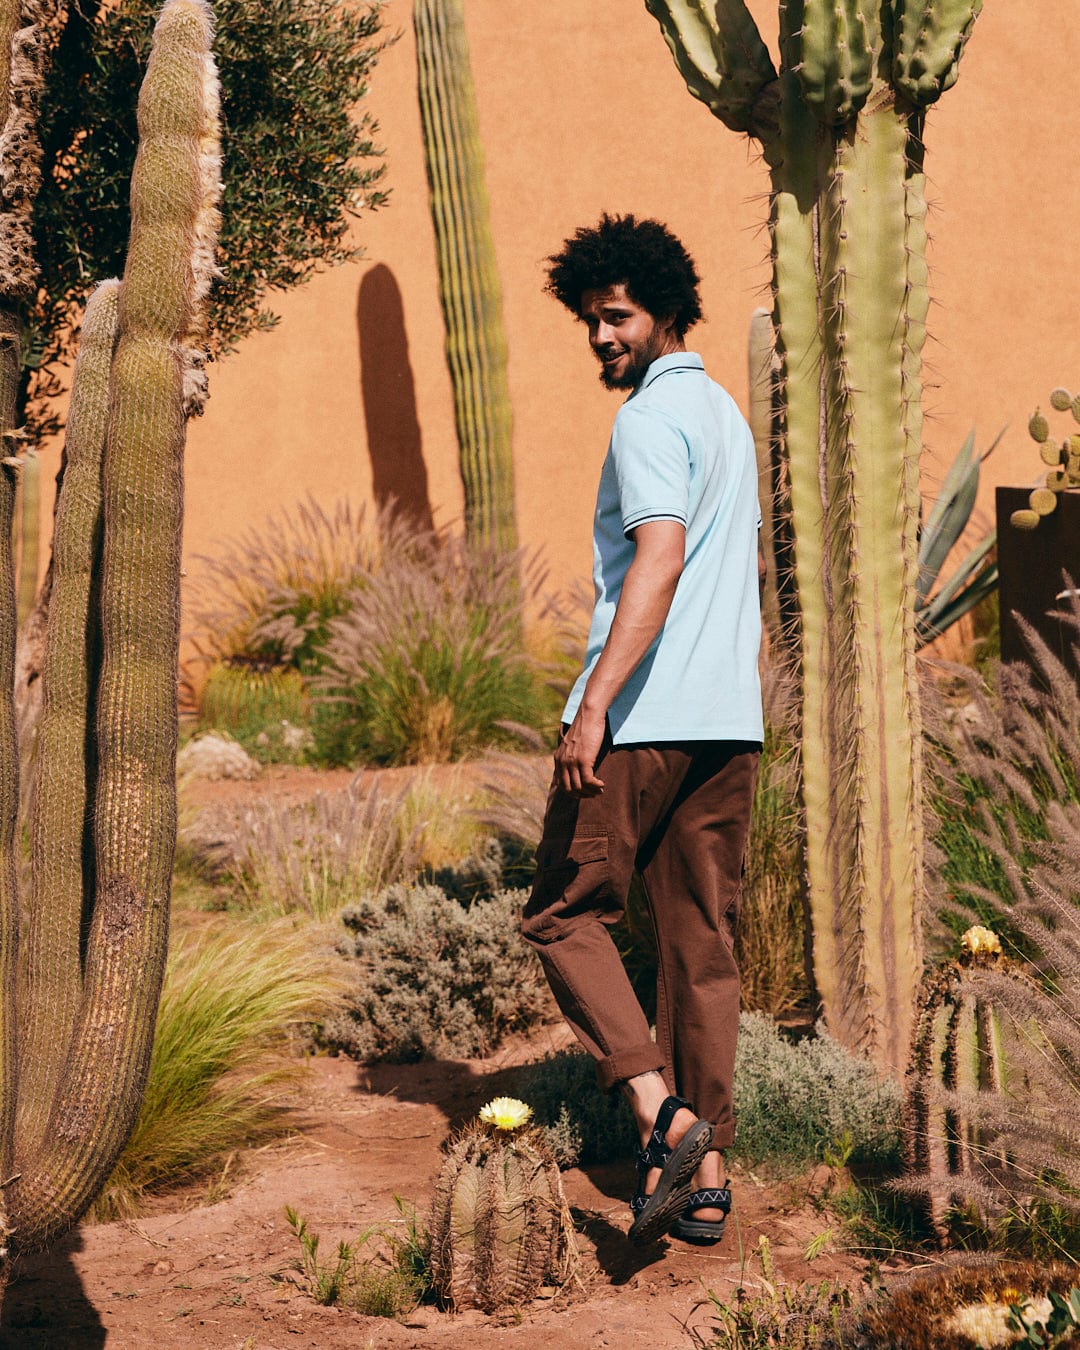 A person wearing a Strike Logo - Mens Short Sleeve Polo Shirt - Light Blue by Saltrock and brown pants walks through a garden with various cacti and plants, smiling and glancing over their shoulder.